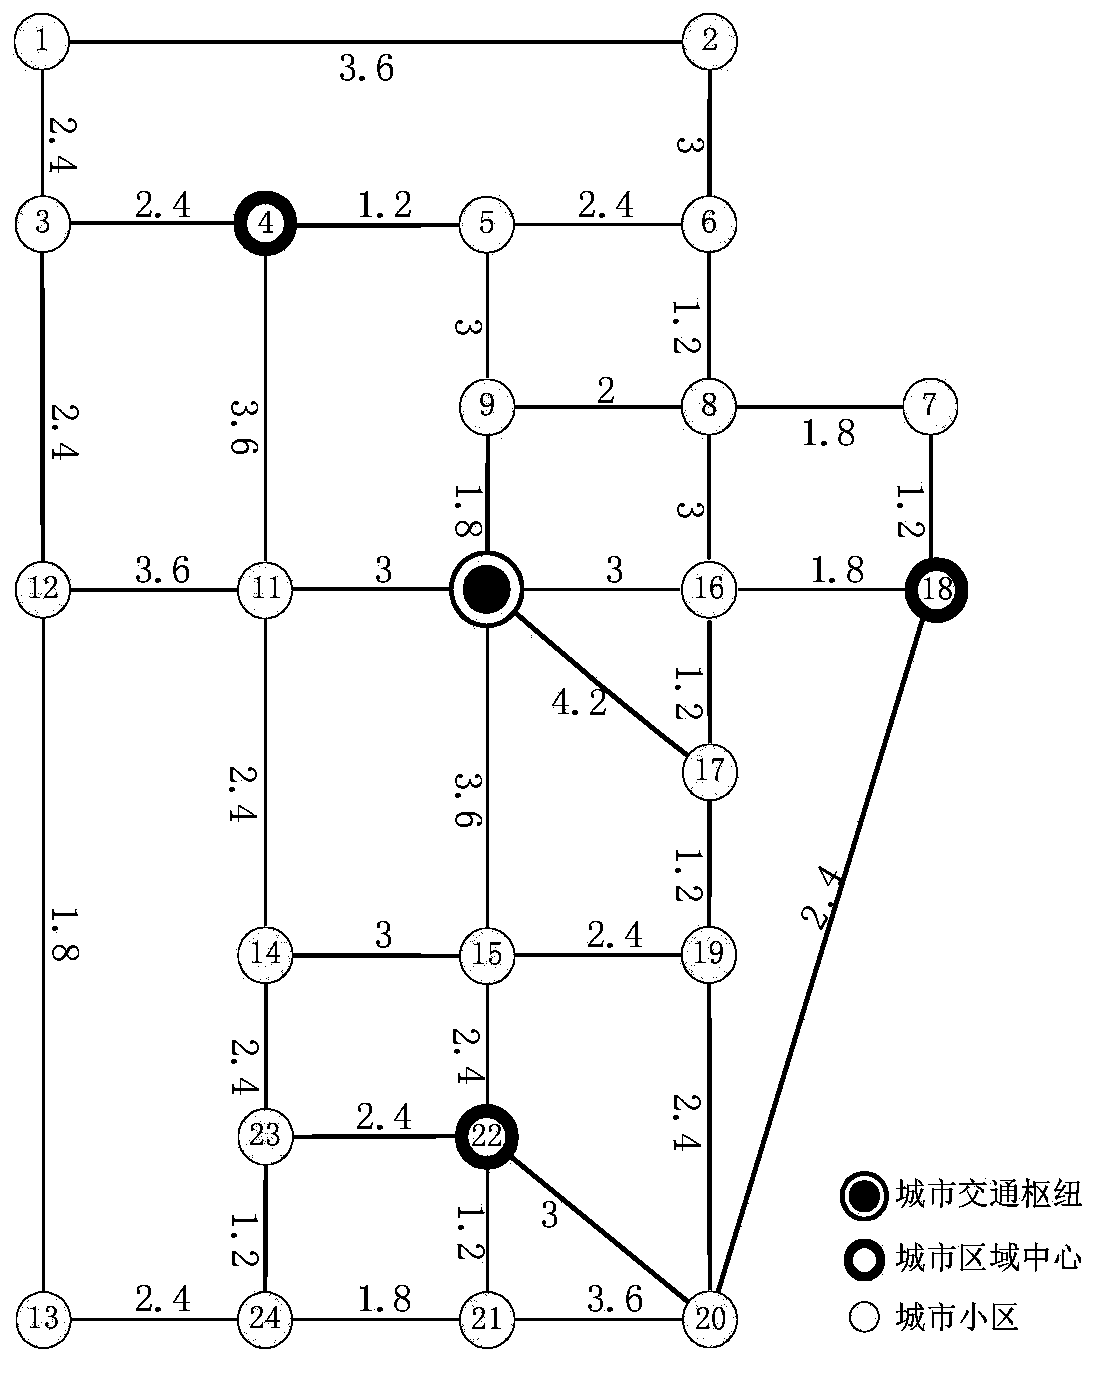 Method for generating urban bus route network based on segmented splicing